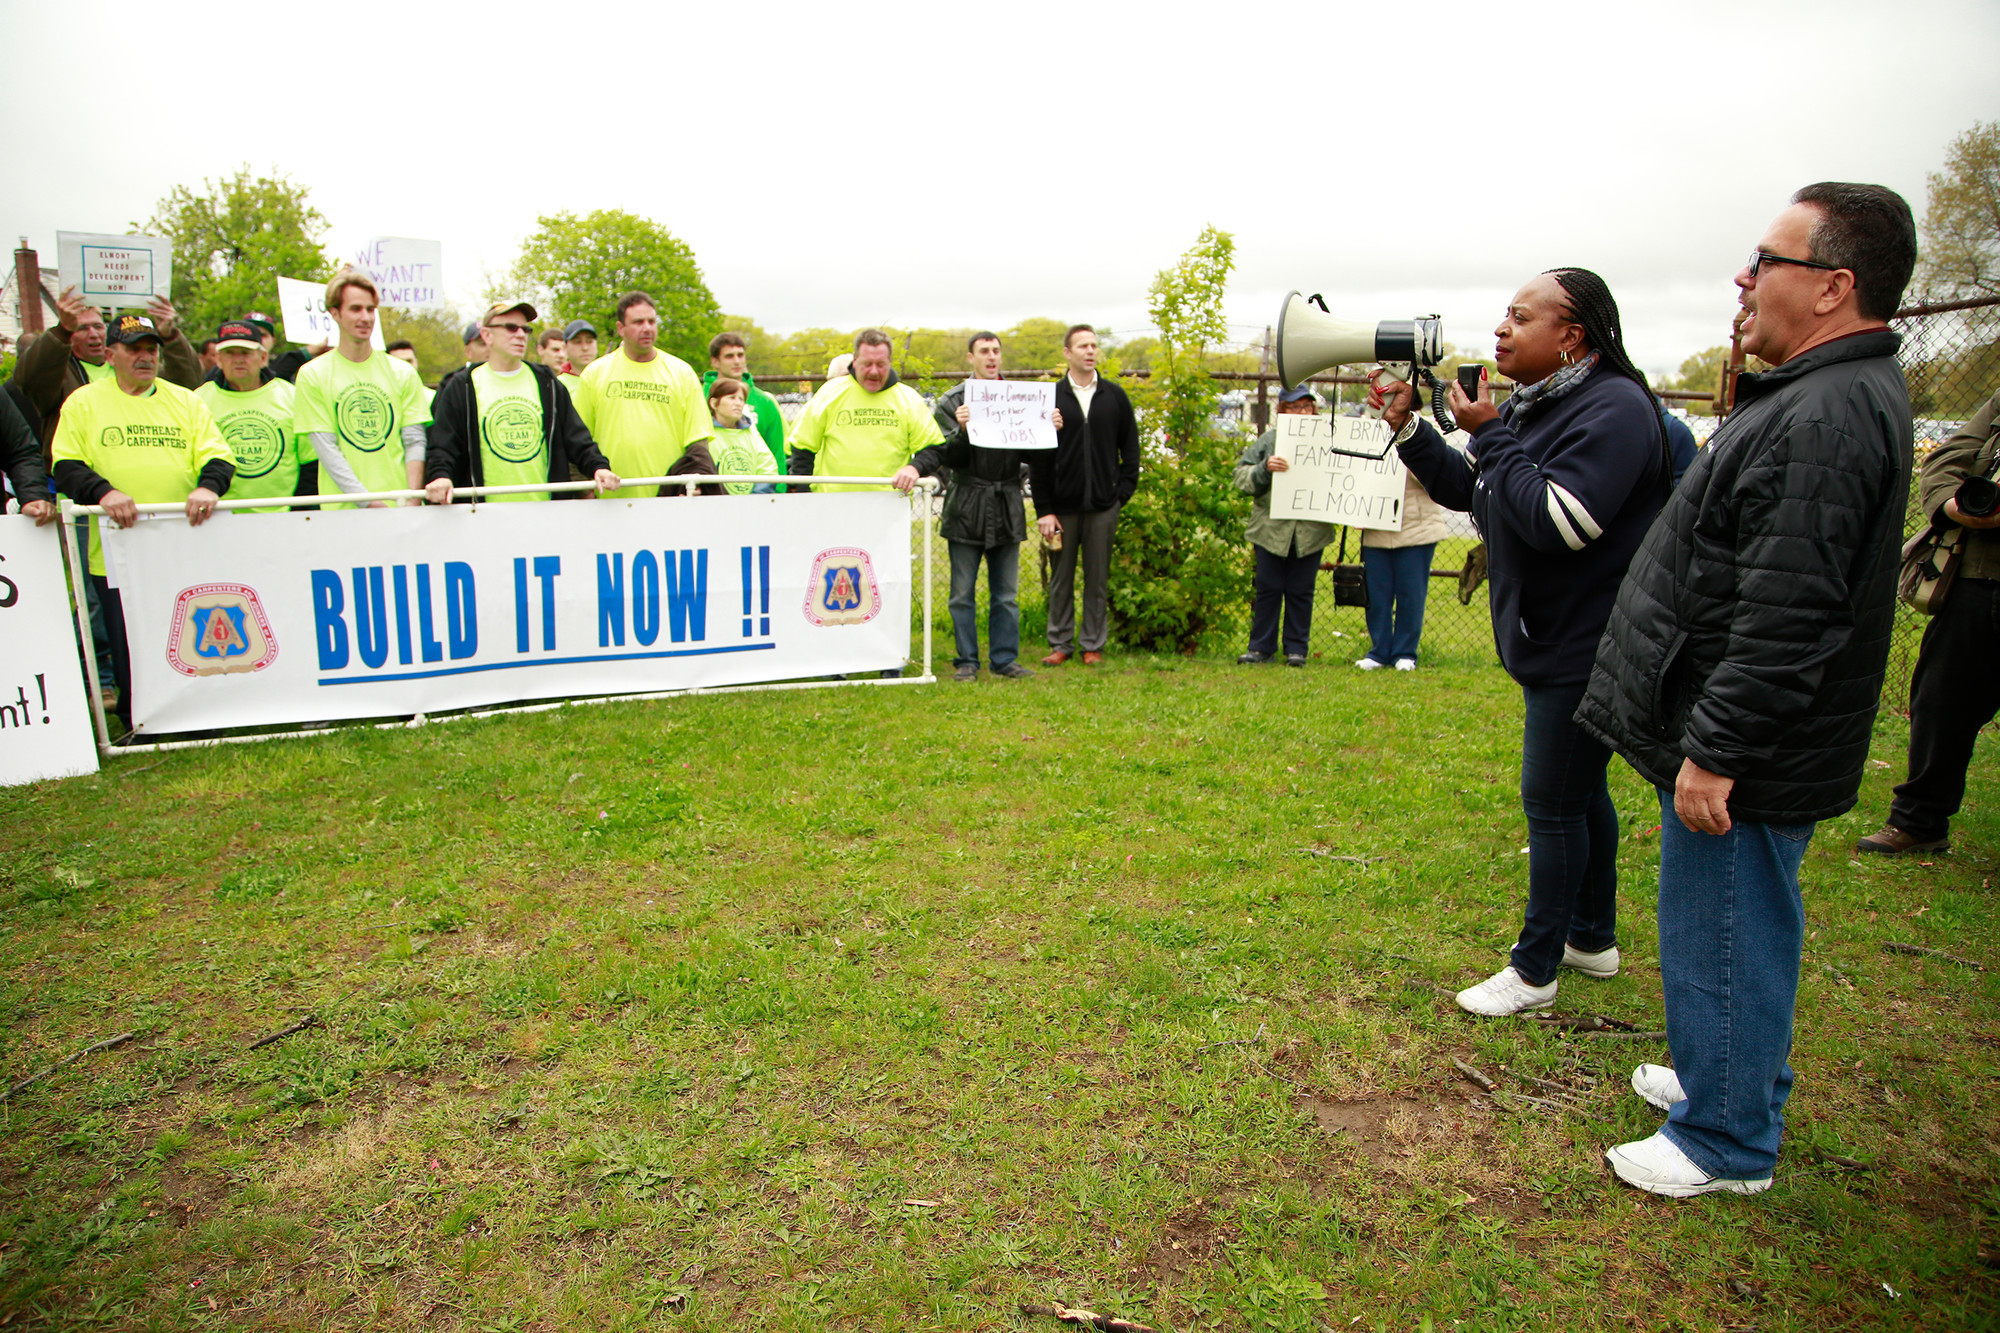 Sandra Smith, chairwoman of the Elmont Coalition for Sustainable Development, spoke to the crowd about the need for meaningful jobs in the area.